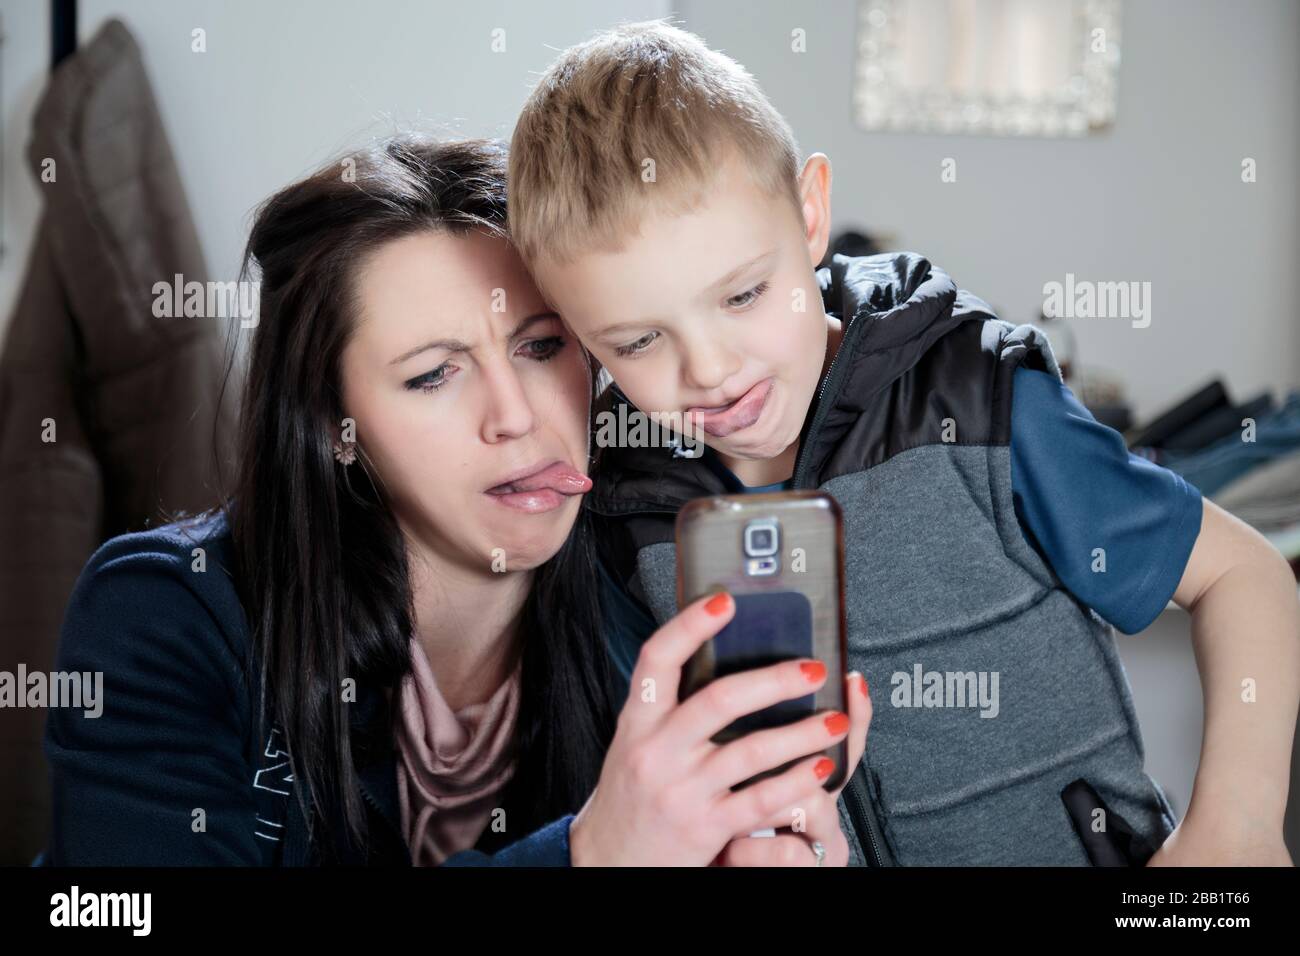 A color photo of a beautiful young mother and her boy looking at a mobile phone and pulling funny faces with they're tongues out. Stock Photo